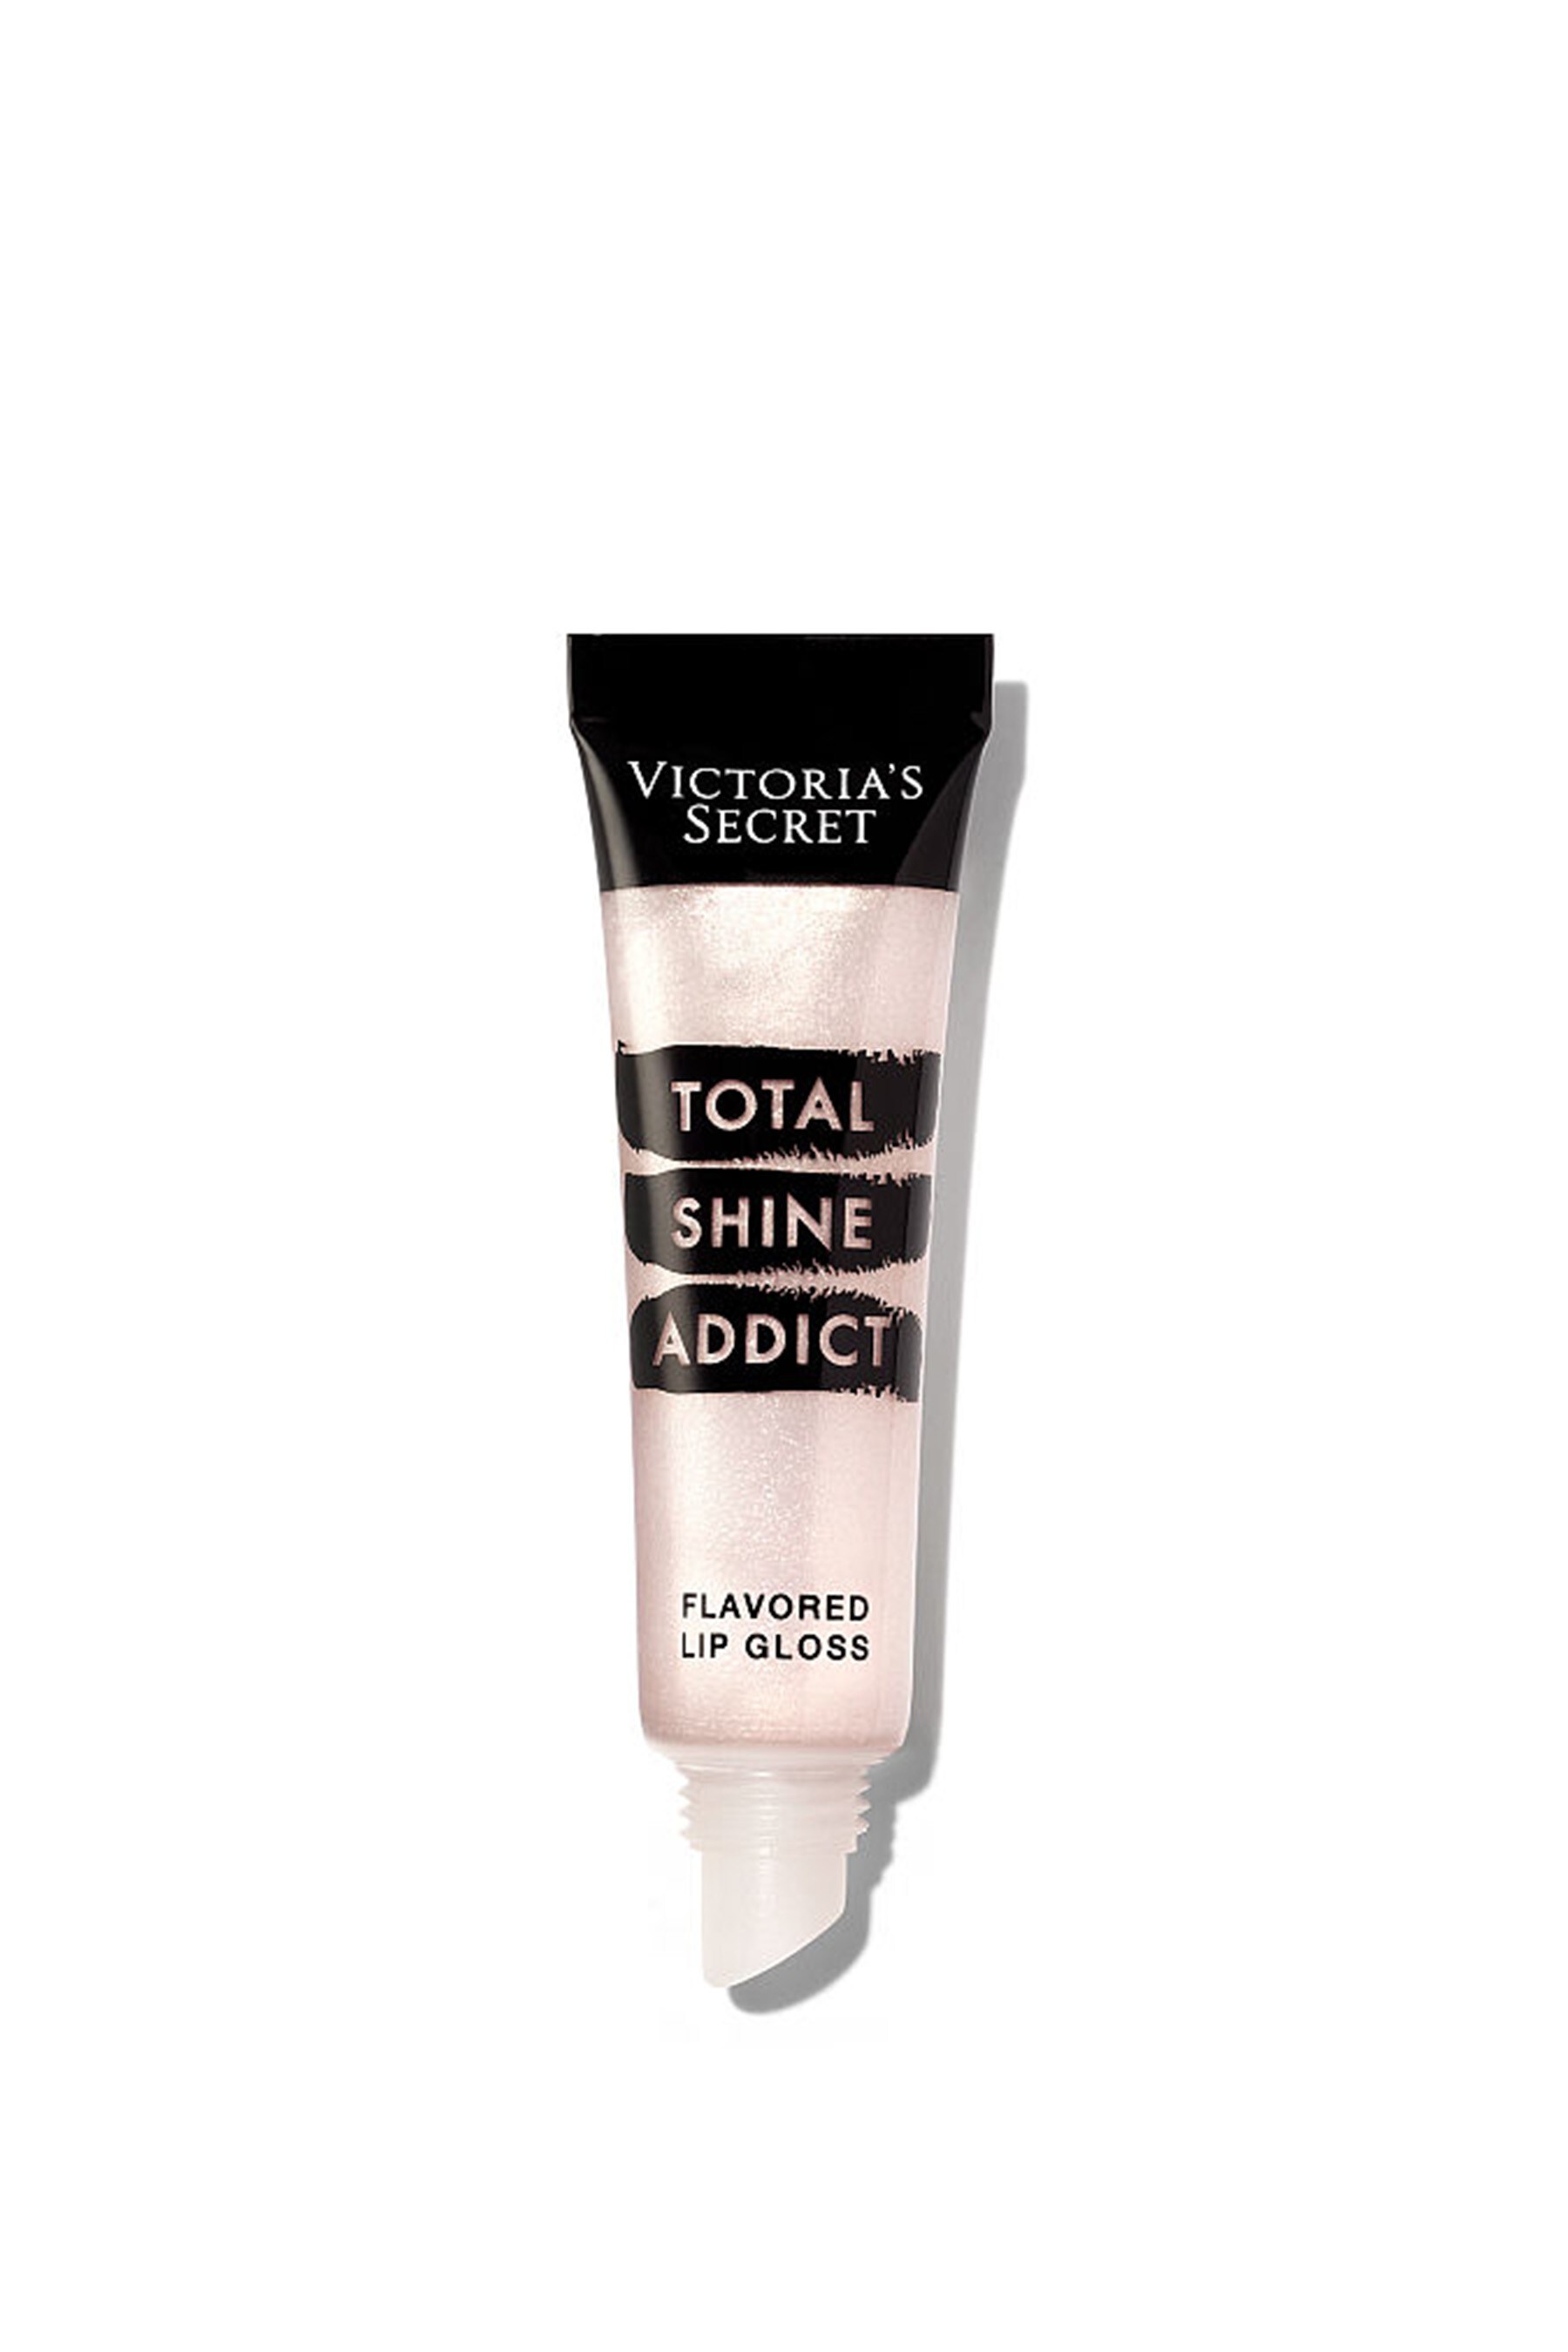 Buy Victoria’s Secret Total Shine Addict Flavored Lip Gloss from the